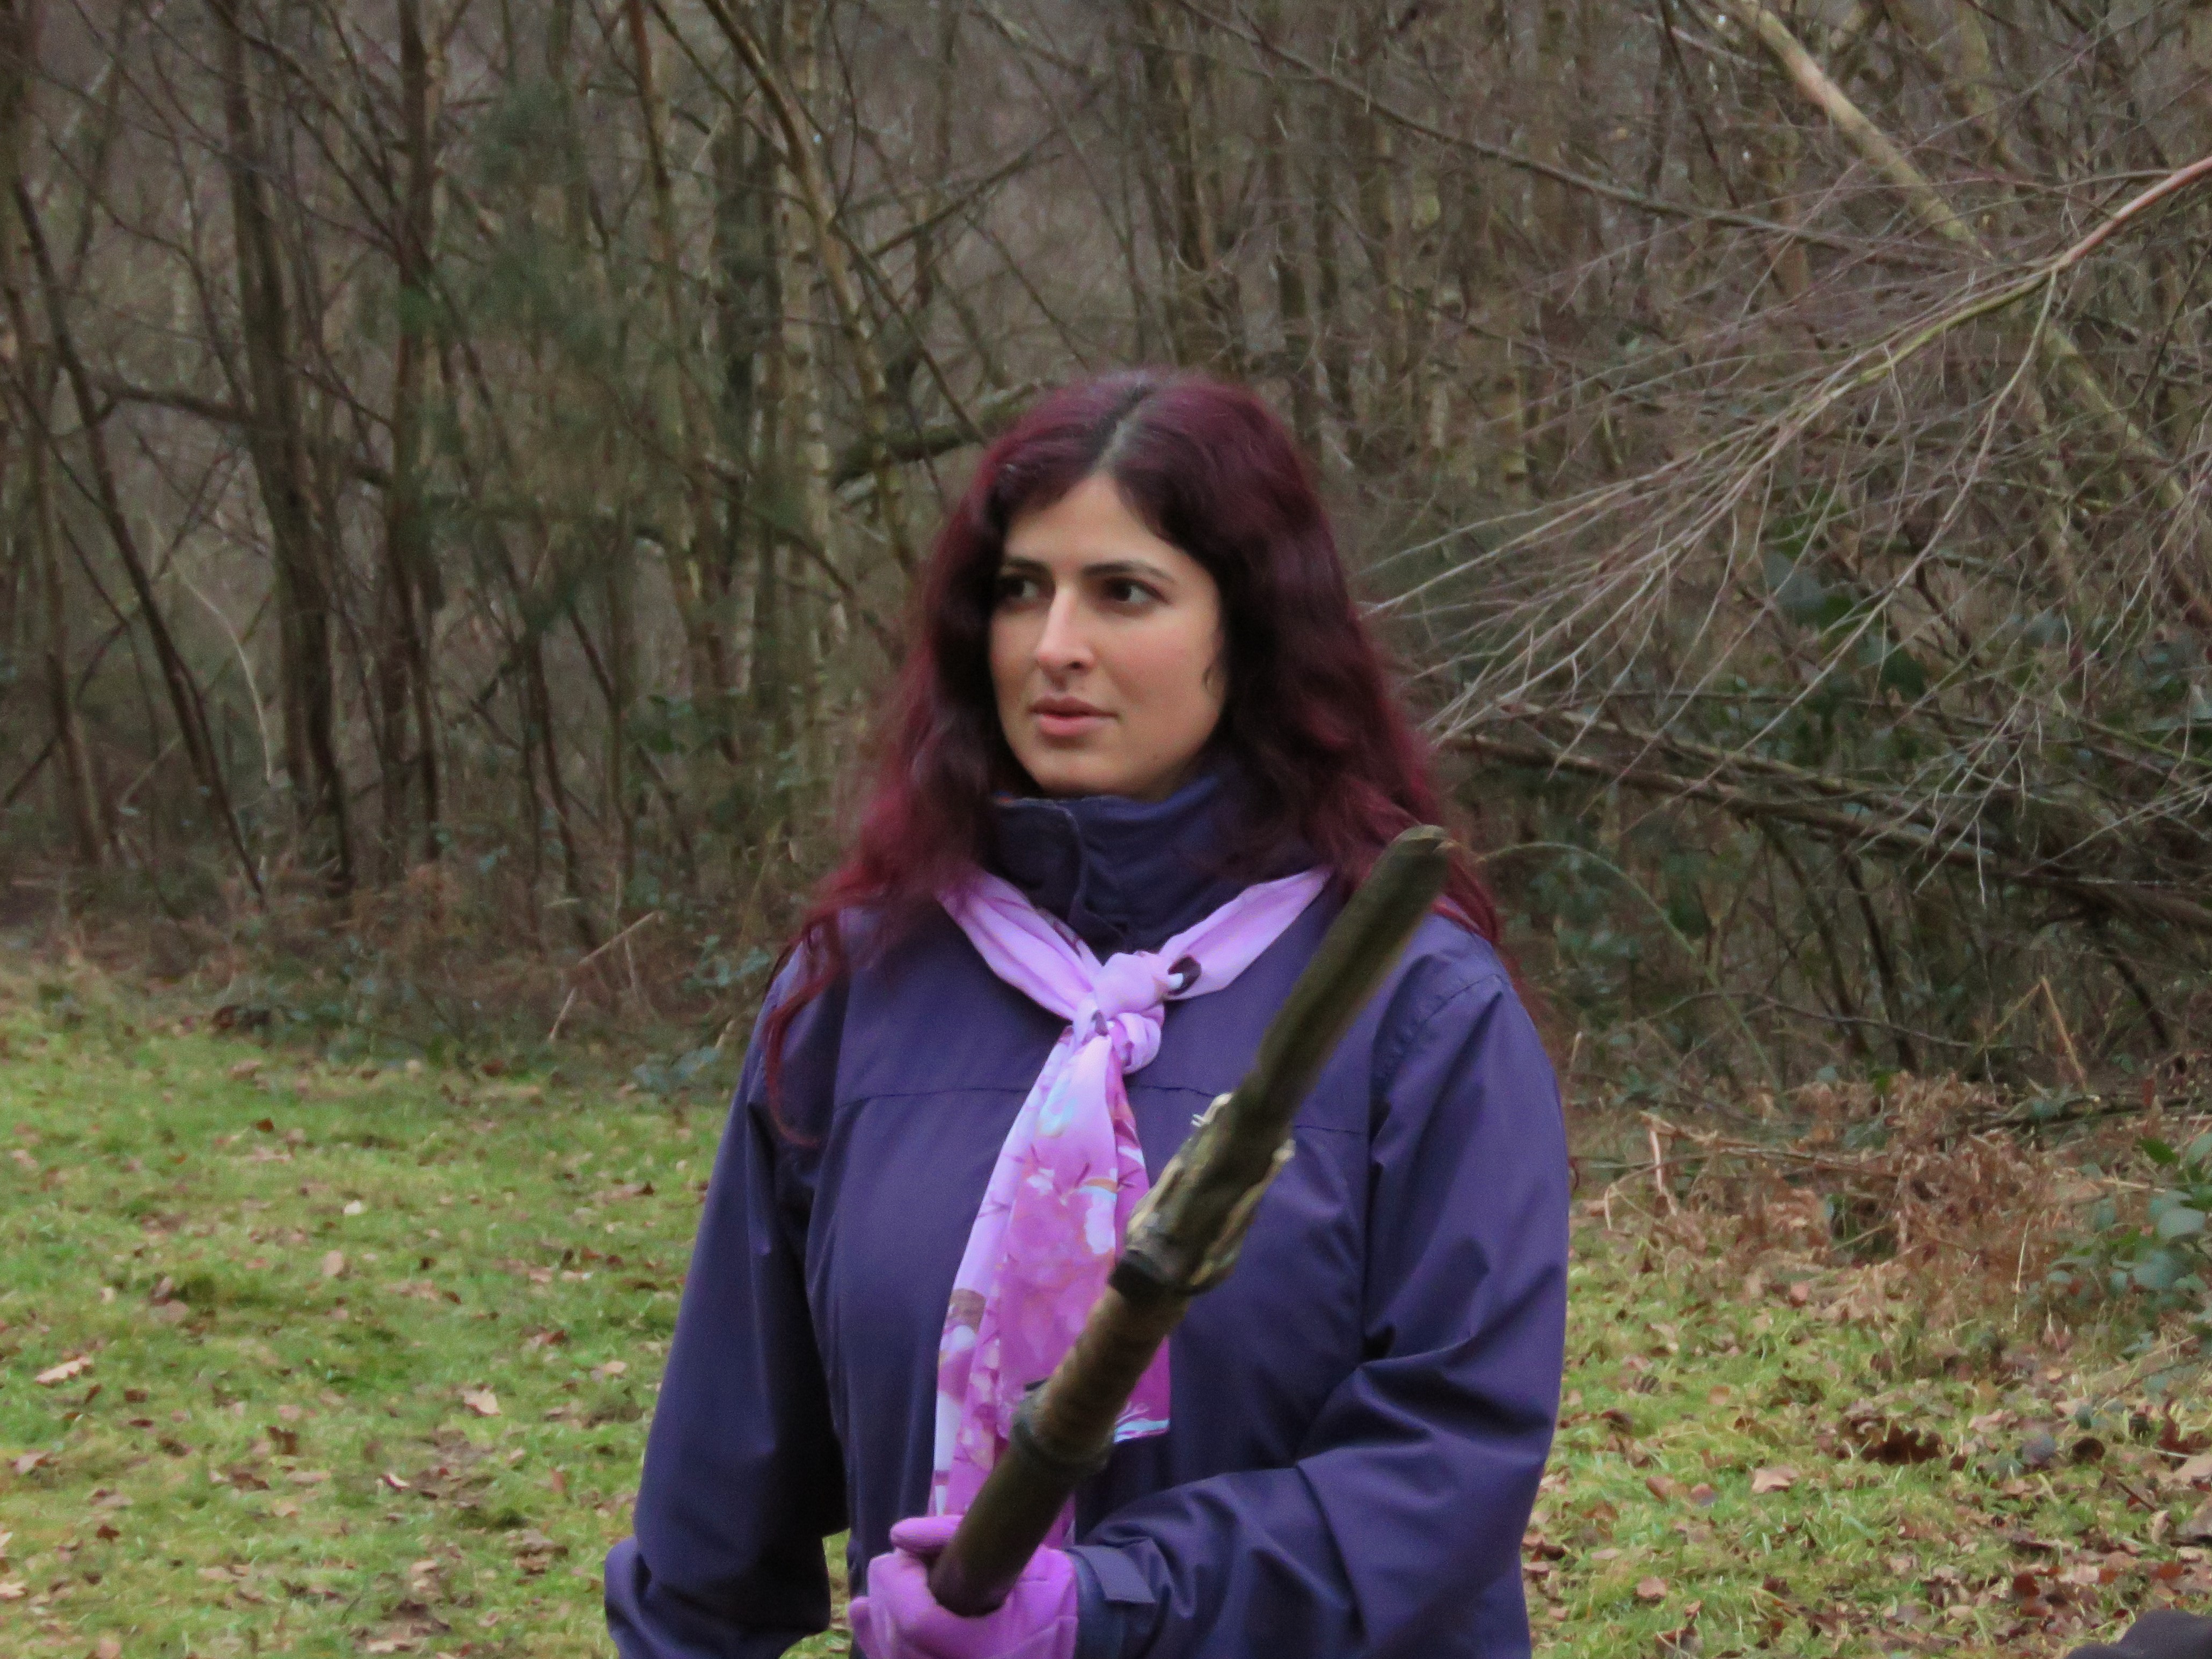  a player in purple, venturing forward apprehensively, weapon ready, but also seeming intrigued